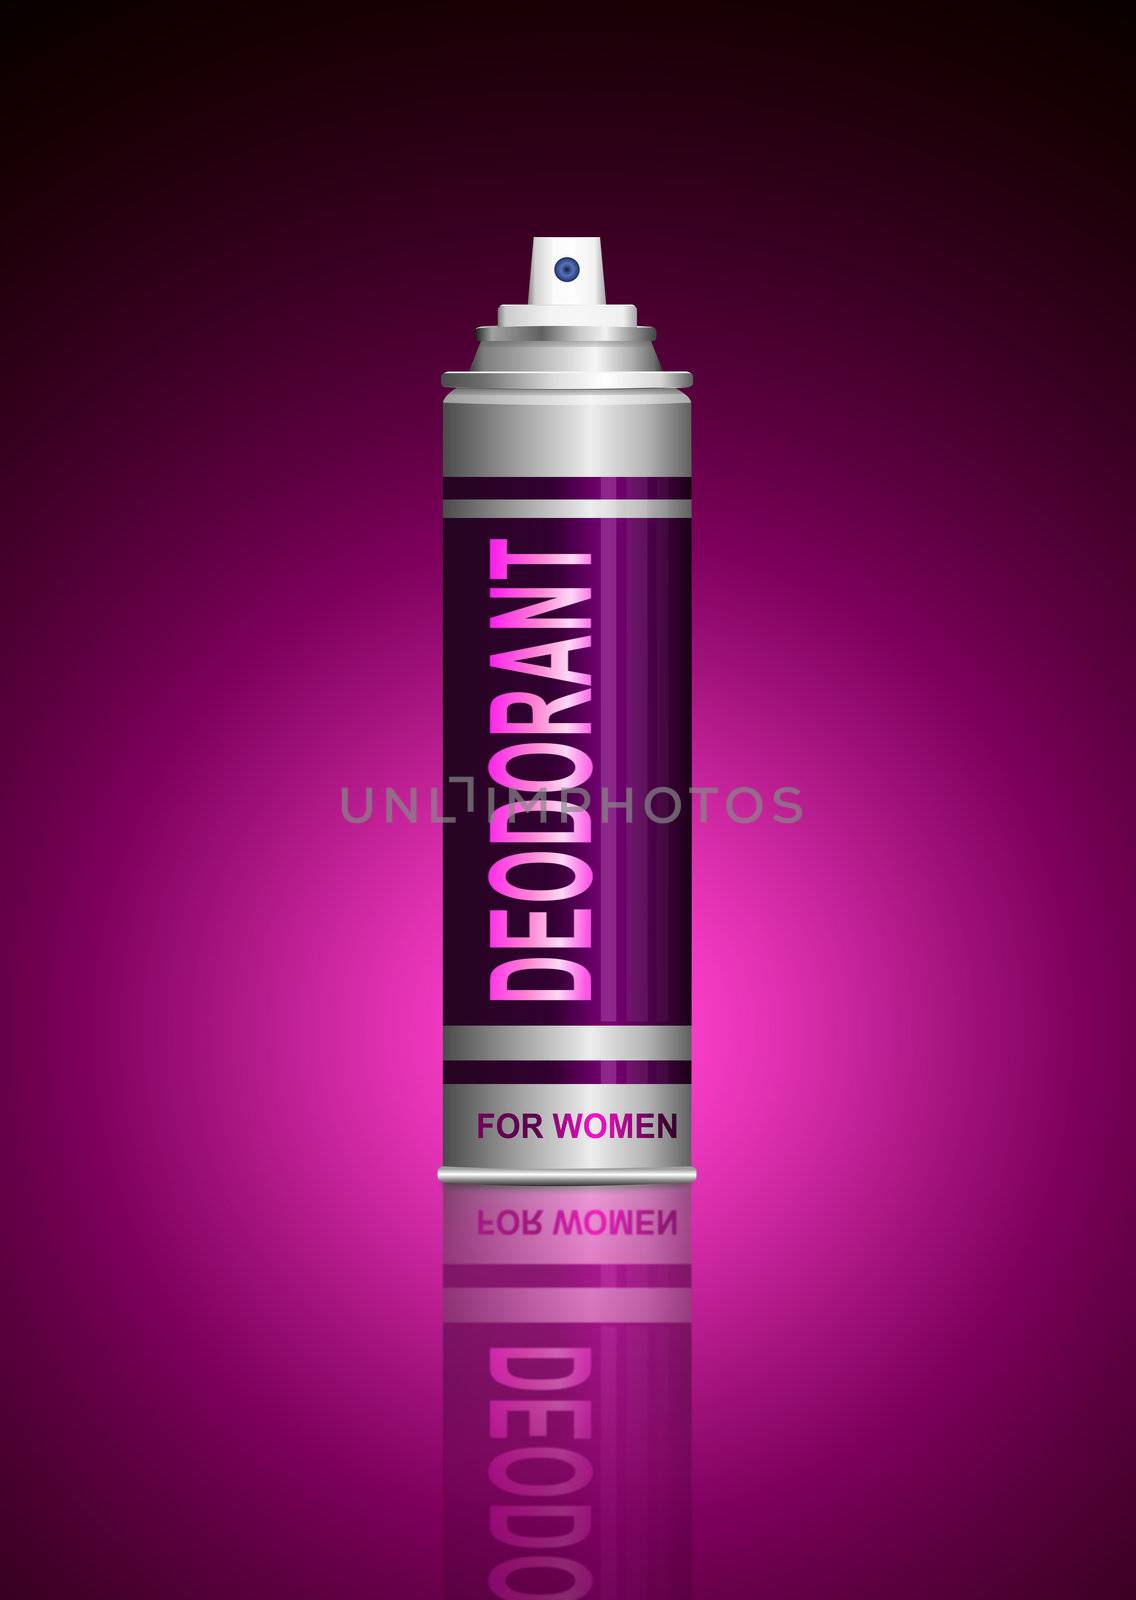 Illustration depicting a single deodorant spray can arranged over pink light effect.